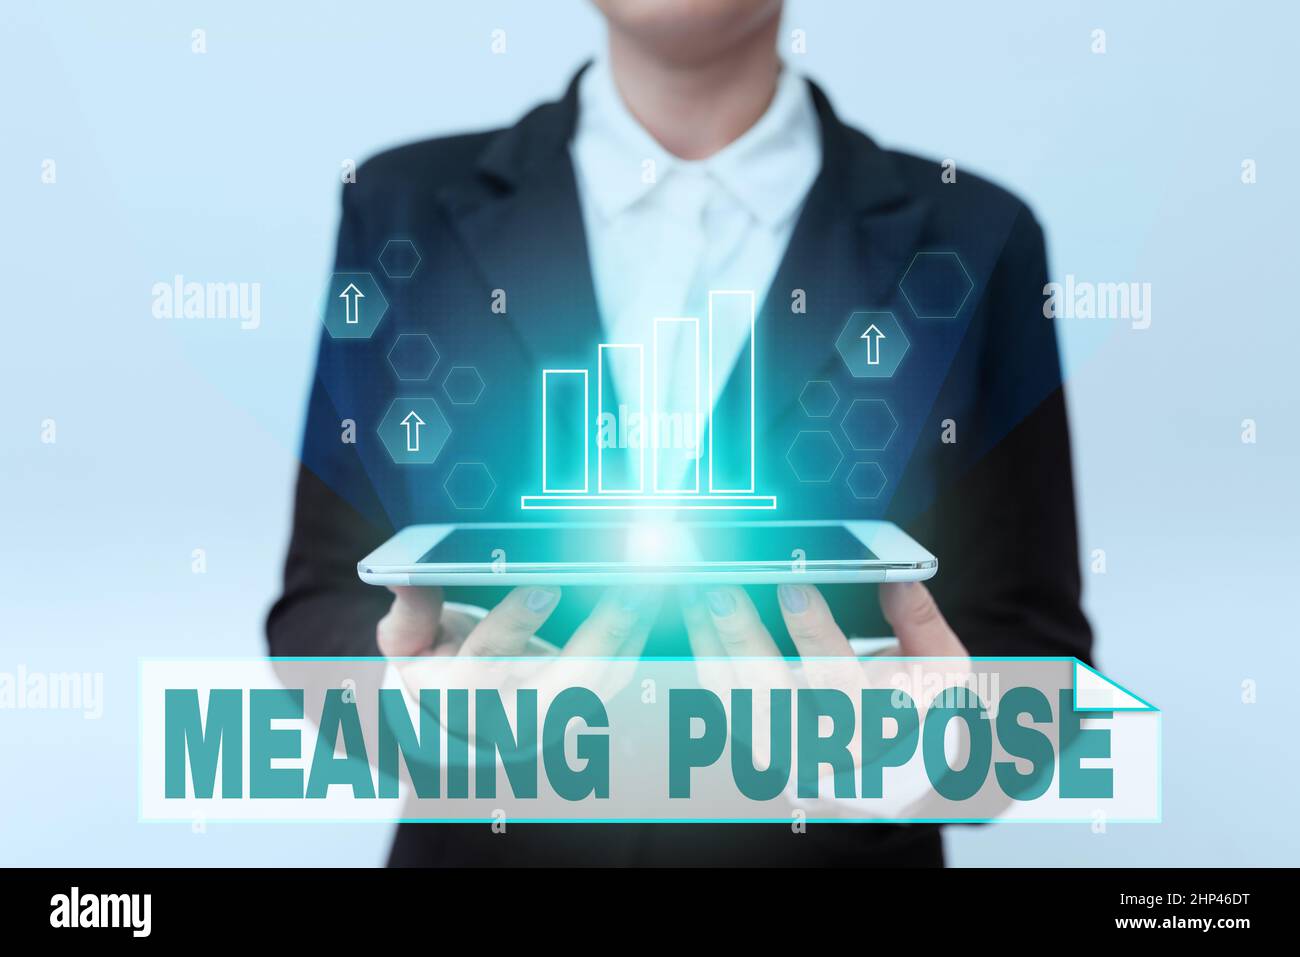 Hand writing sign Meaning Purpose, Internet Concept The reason for which something is done or created and exists Lady In Uniform Holding Phone And Sho Stock Photo